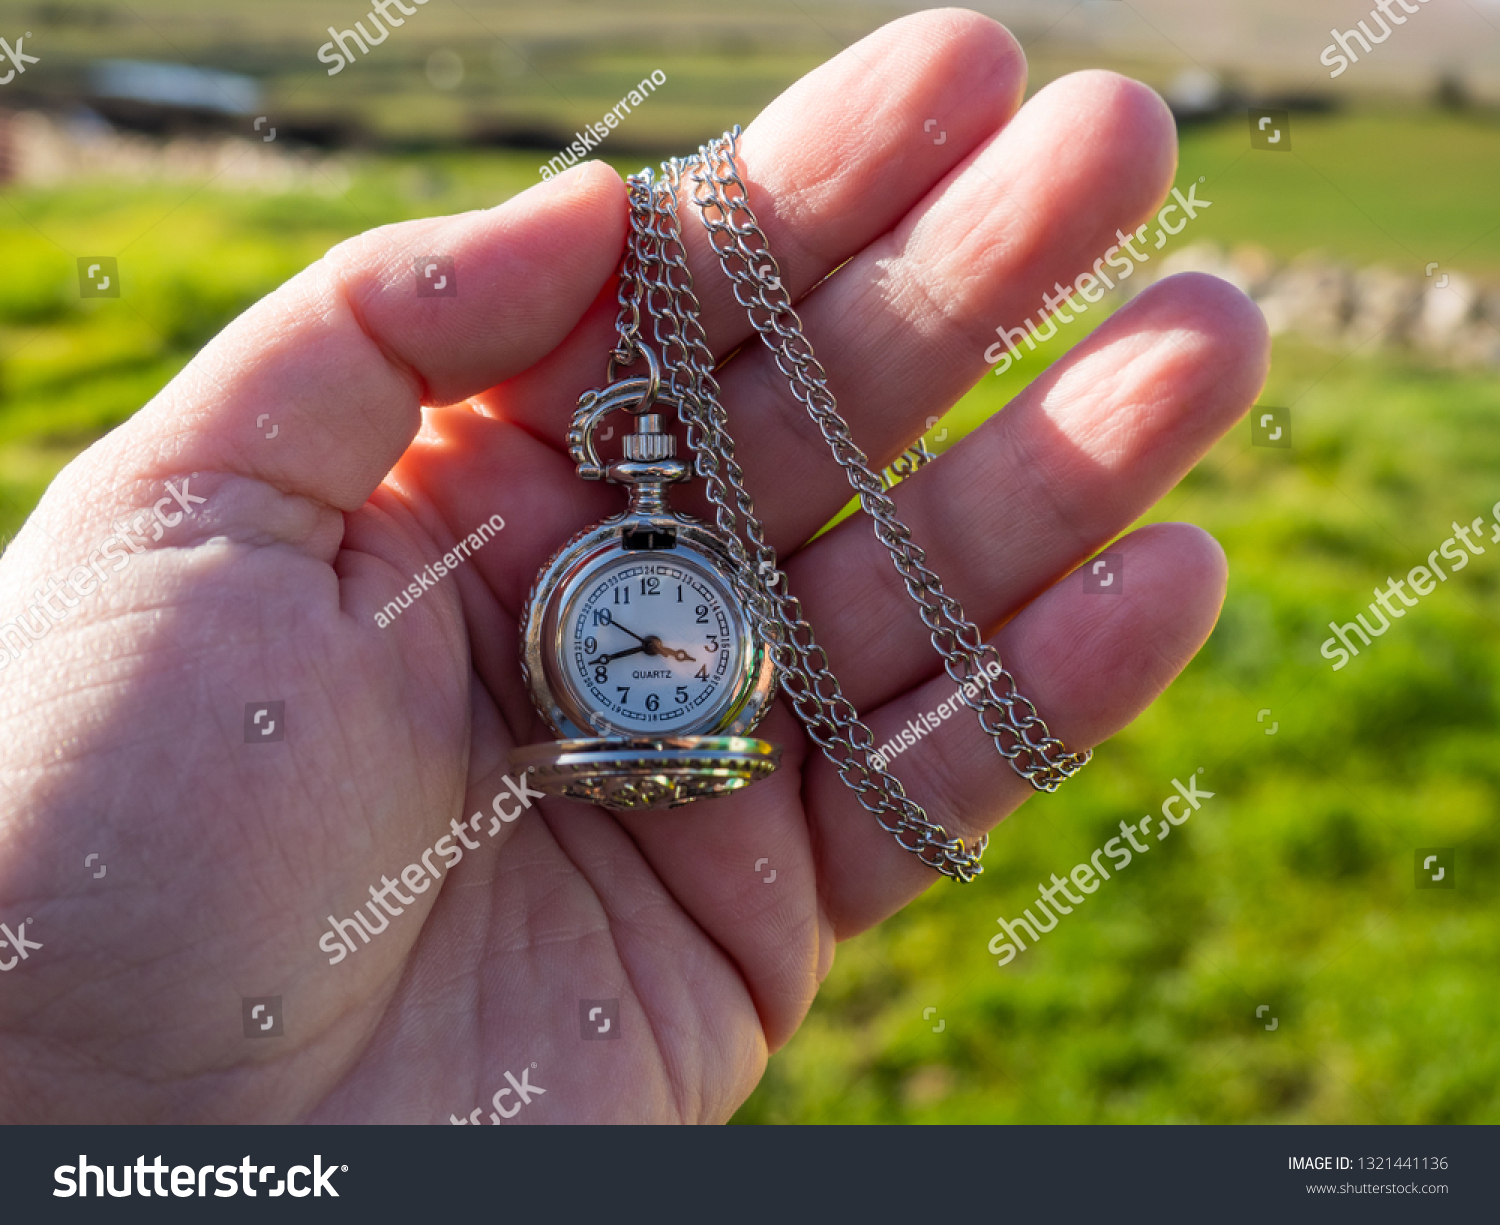 One person with one antique chain watch plated in his hand #1321441136